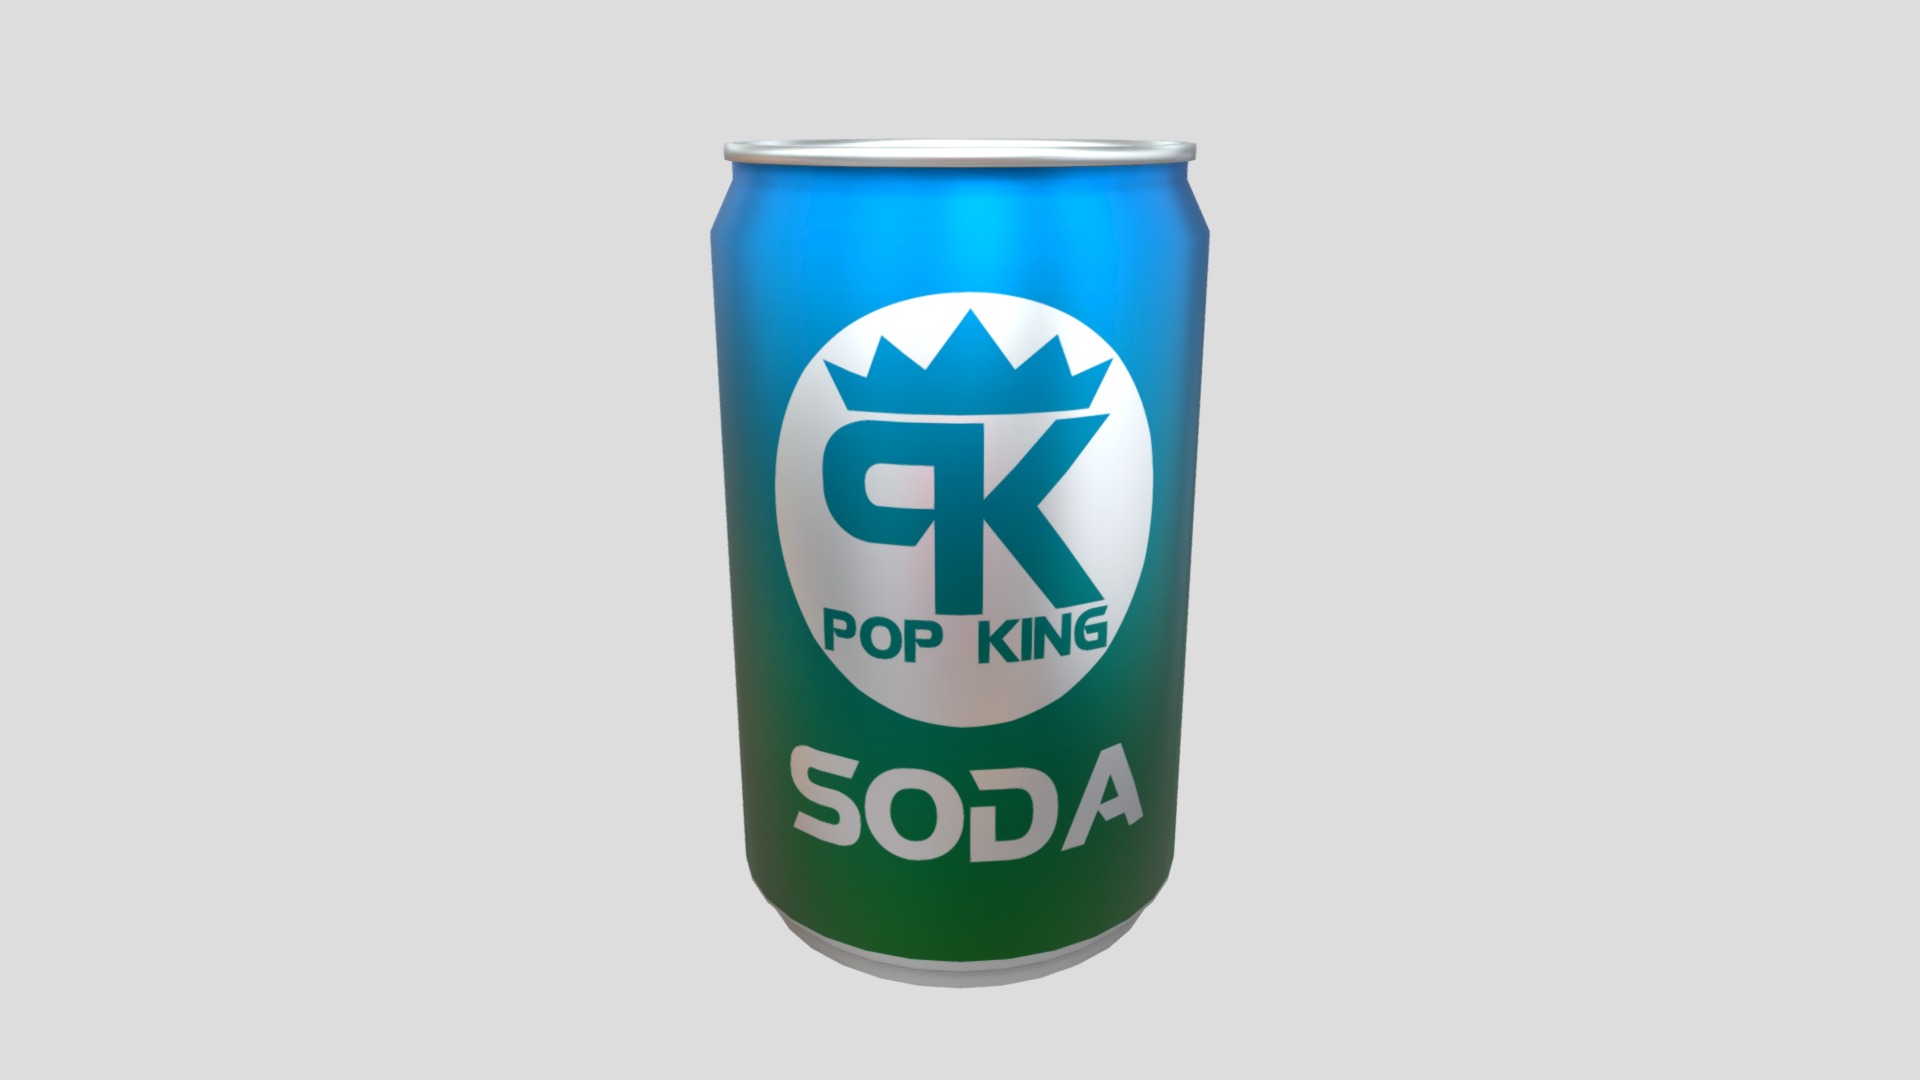 3D model Pop King Soda Can - This is a 3D model of the Pop King Soda Can. The 3D model is about a blue can of soda.